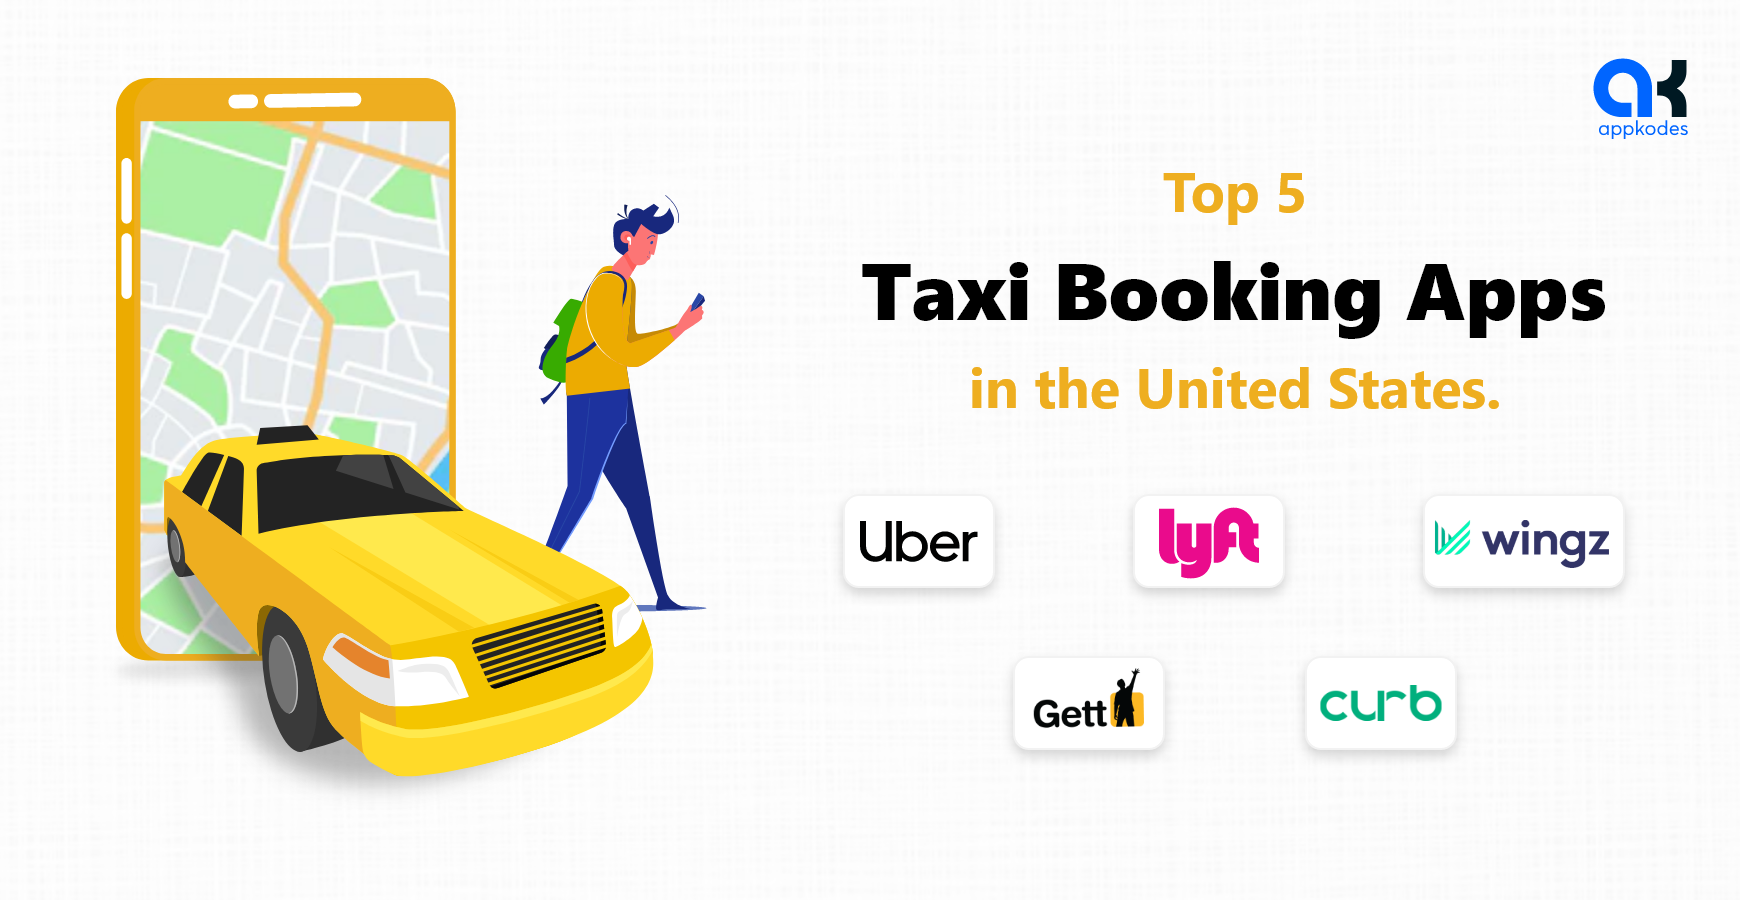 Top 5 Taxi Booking apps in the United states